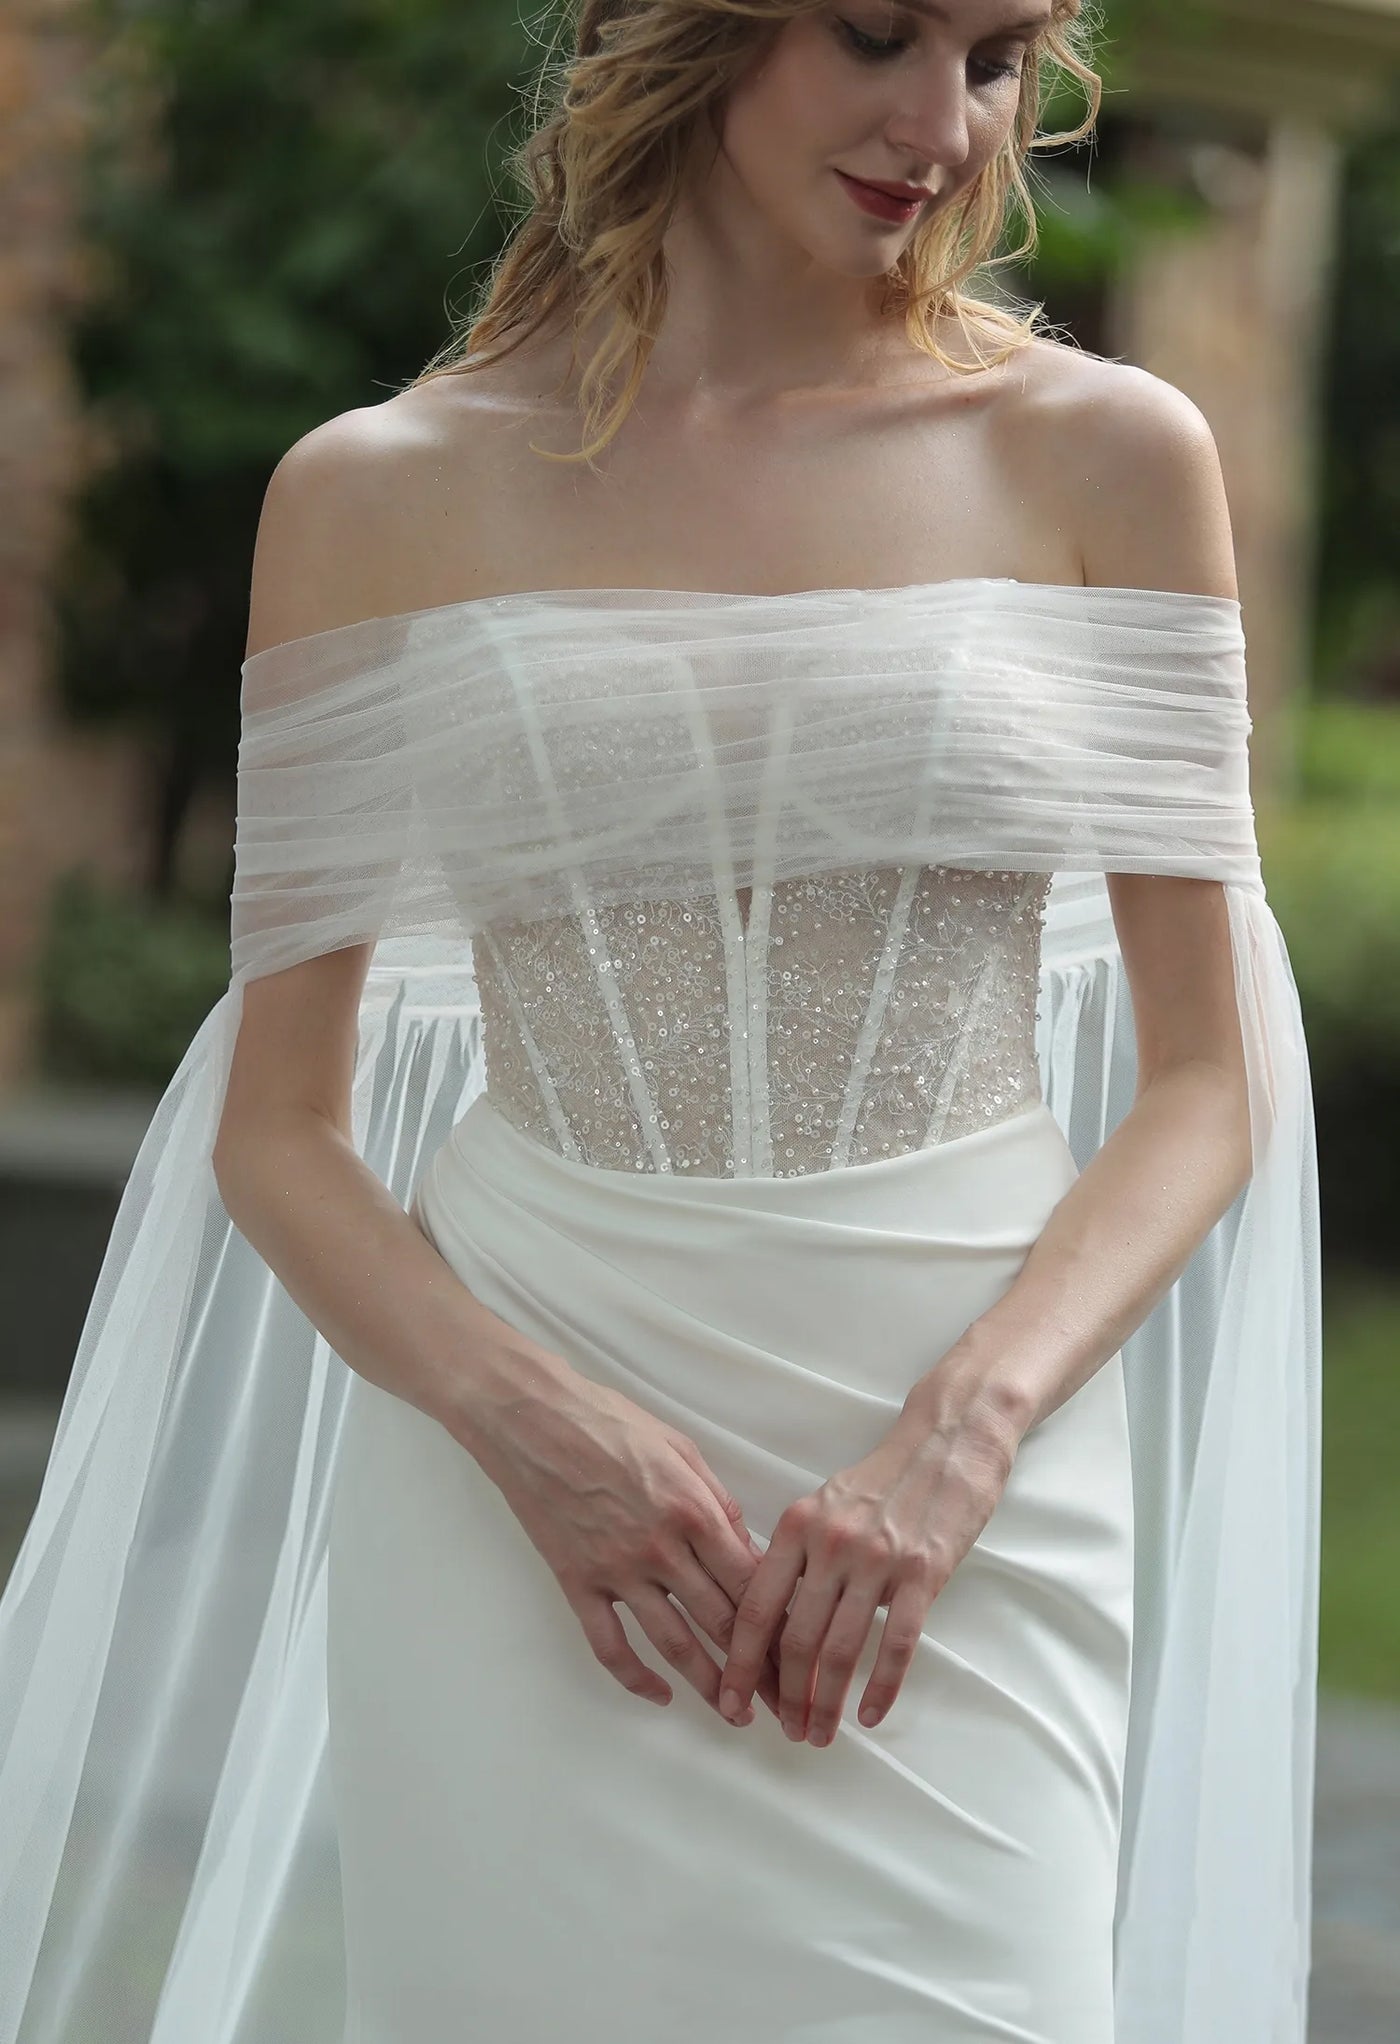 A woman in an elegant off-shoulder Bergamot Bridal wedding dress with a beaded bodice and sheer overlay, gracefully adjusting the fabric near her waist.